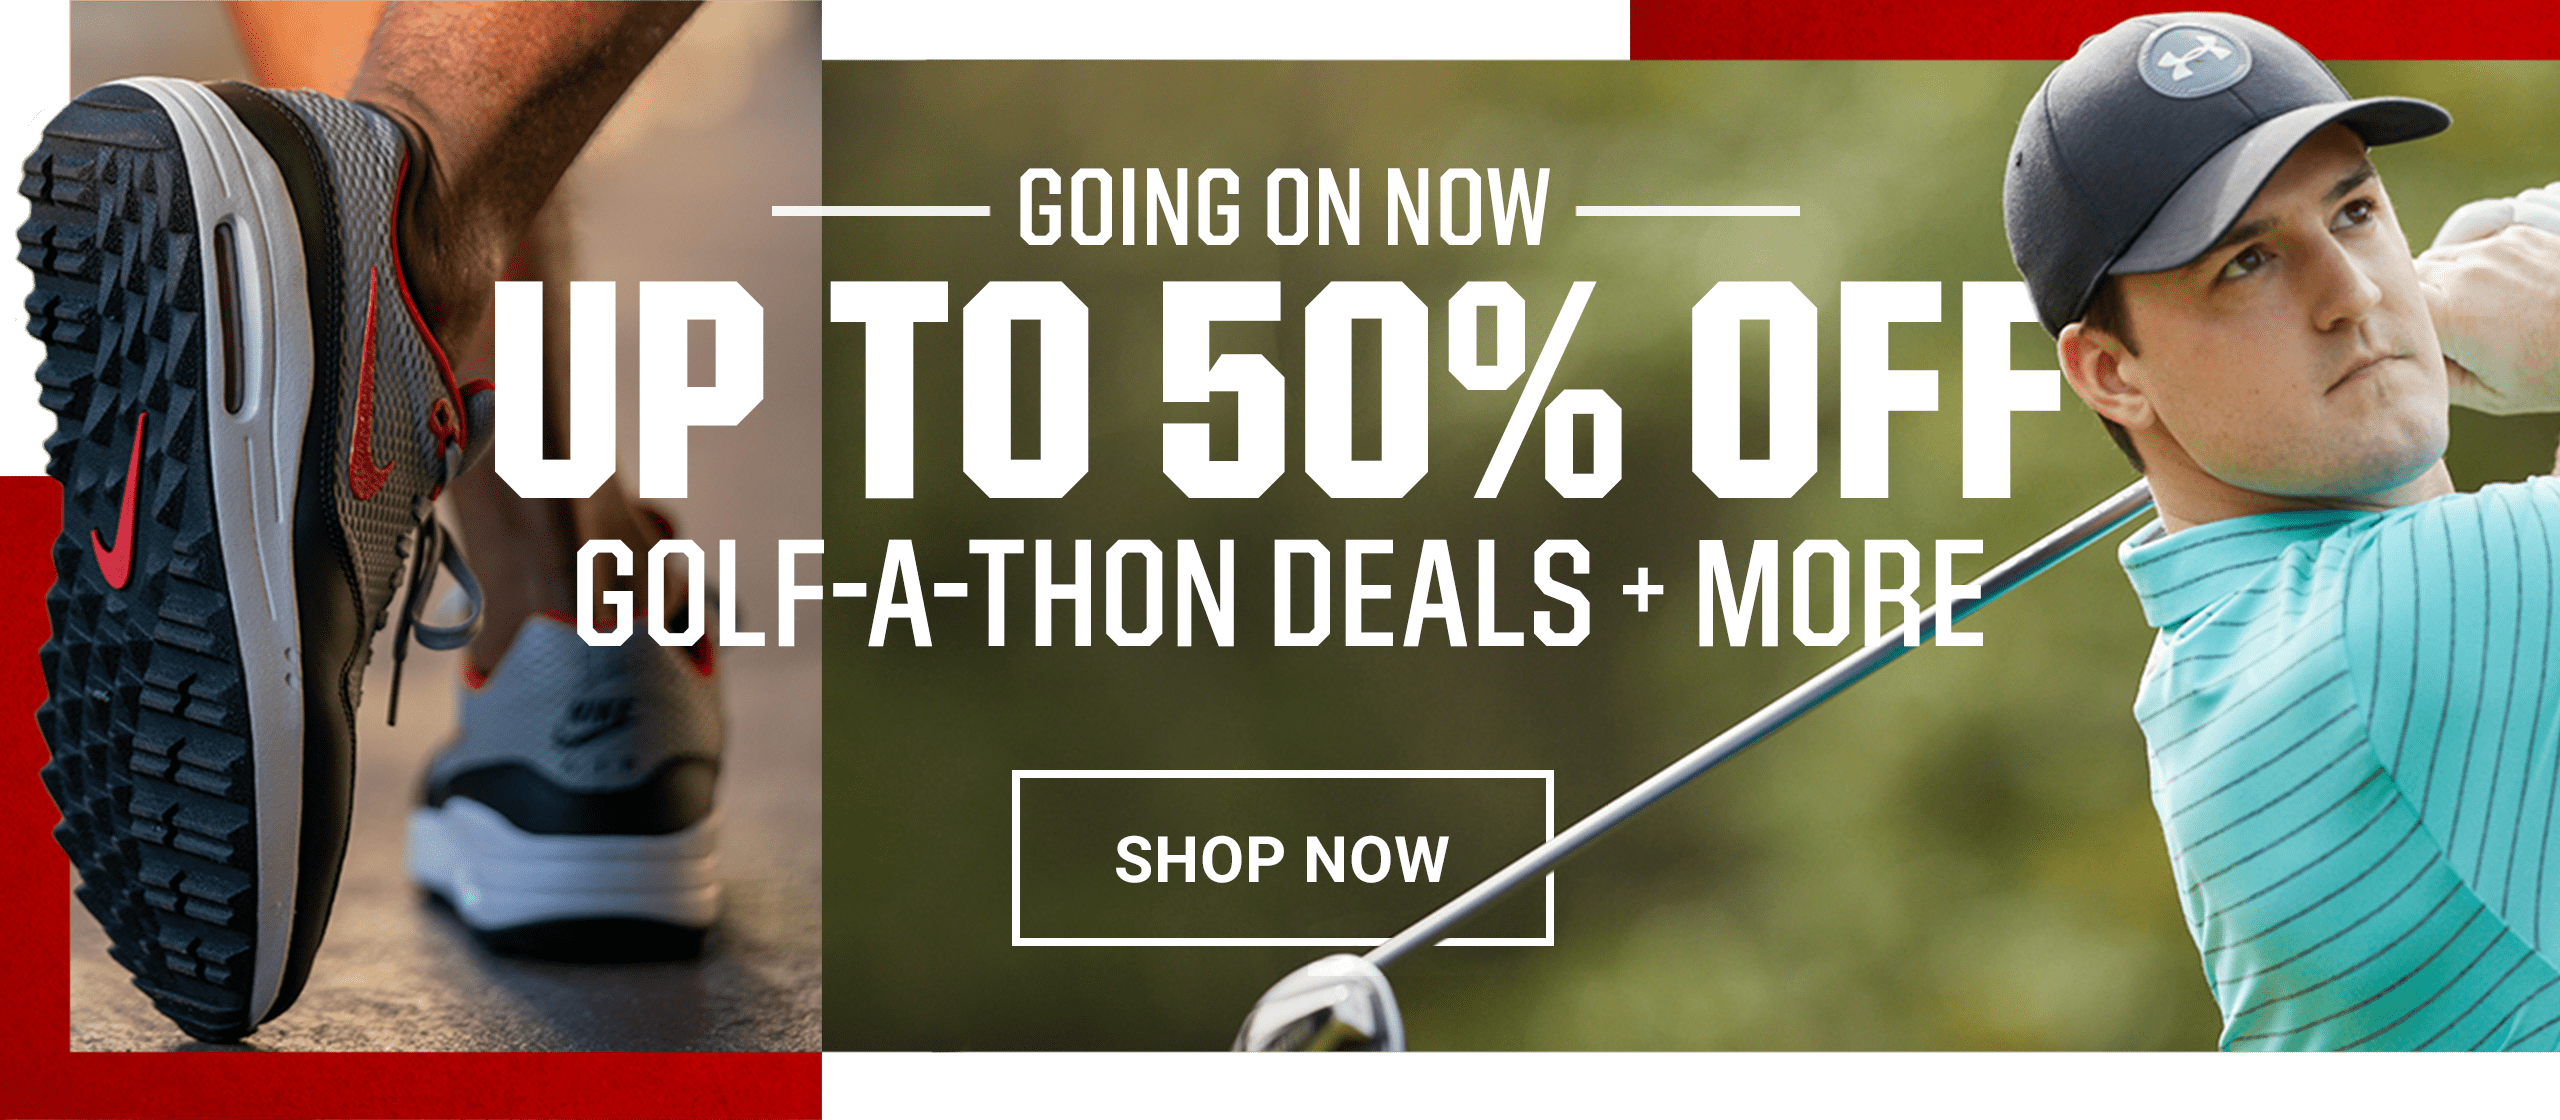 Going on now. Up to 50% off Golf-a-Thon deals and more. Shop now.